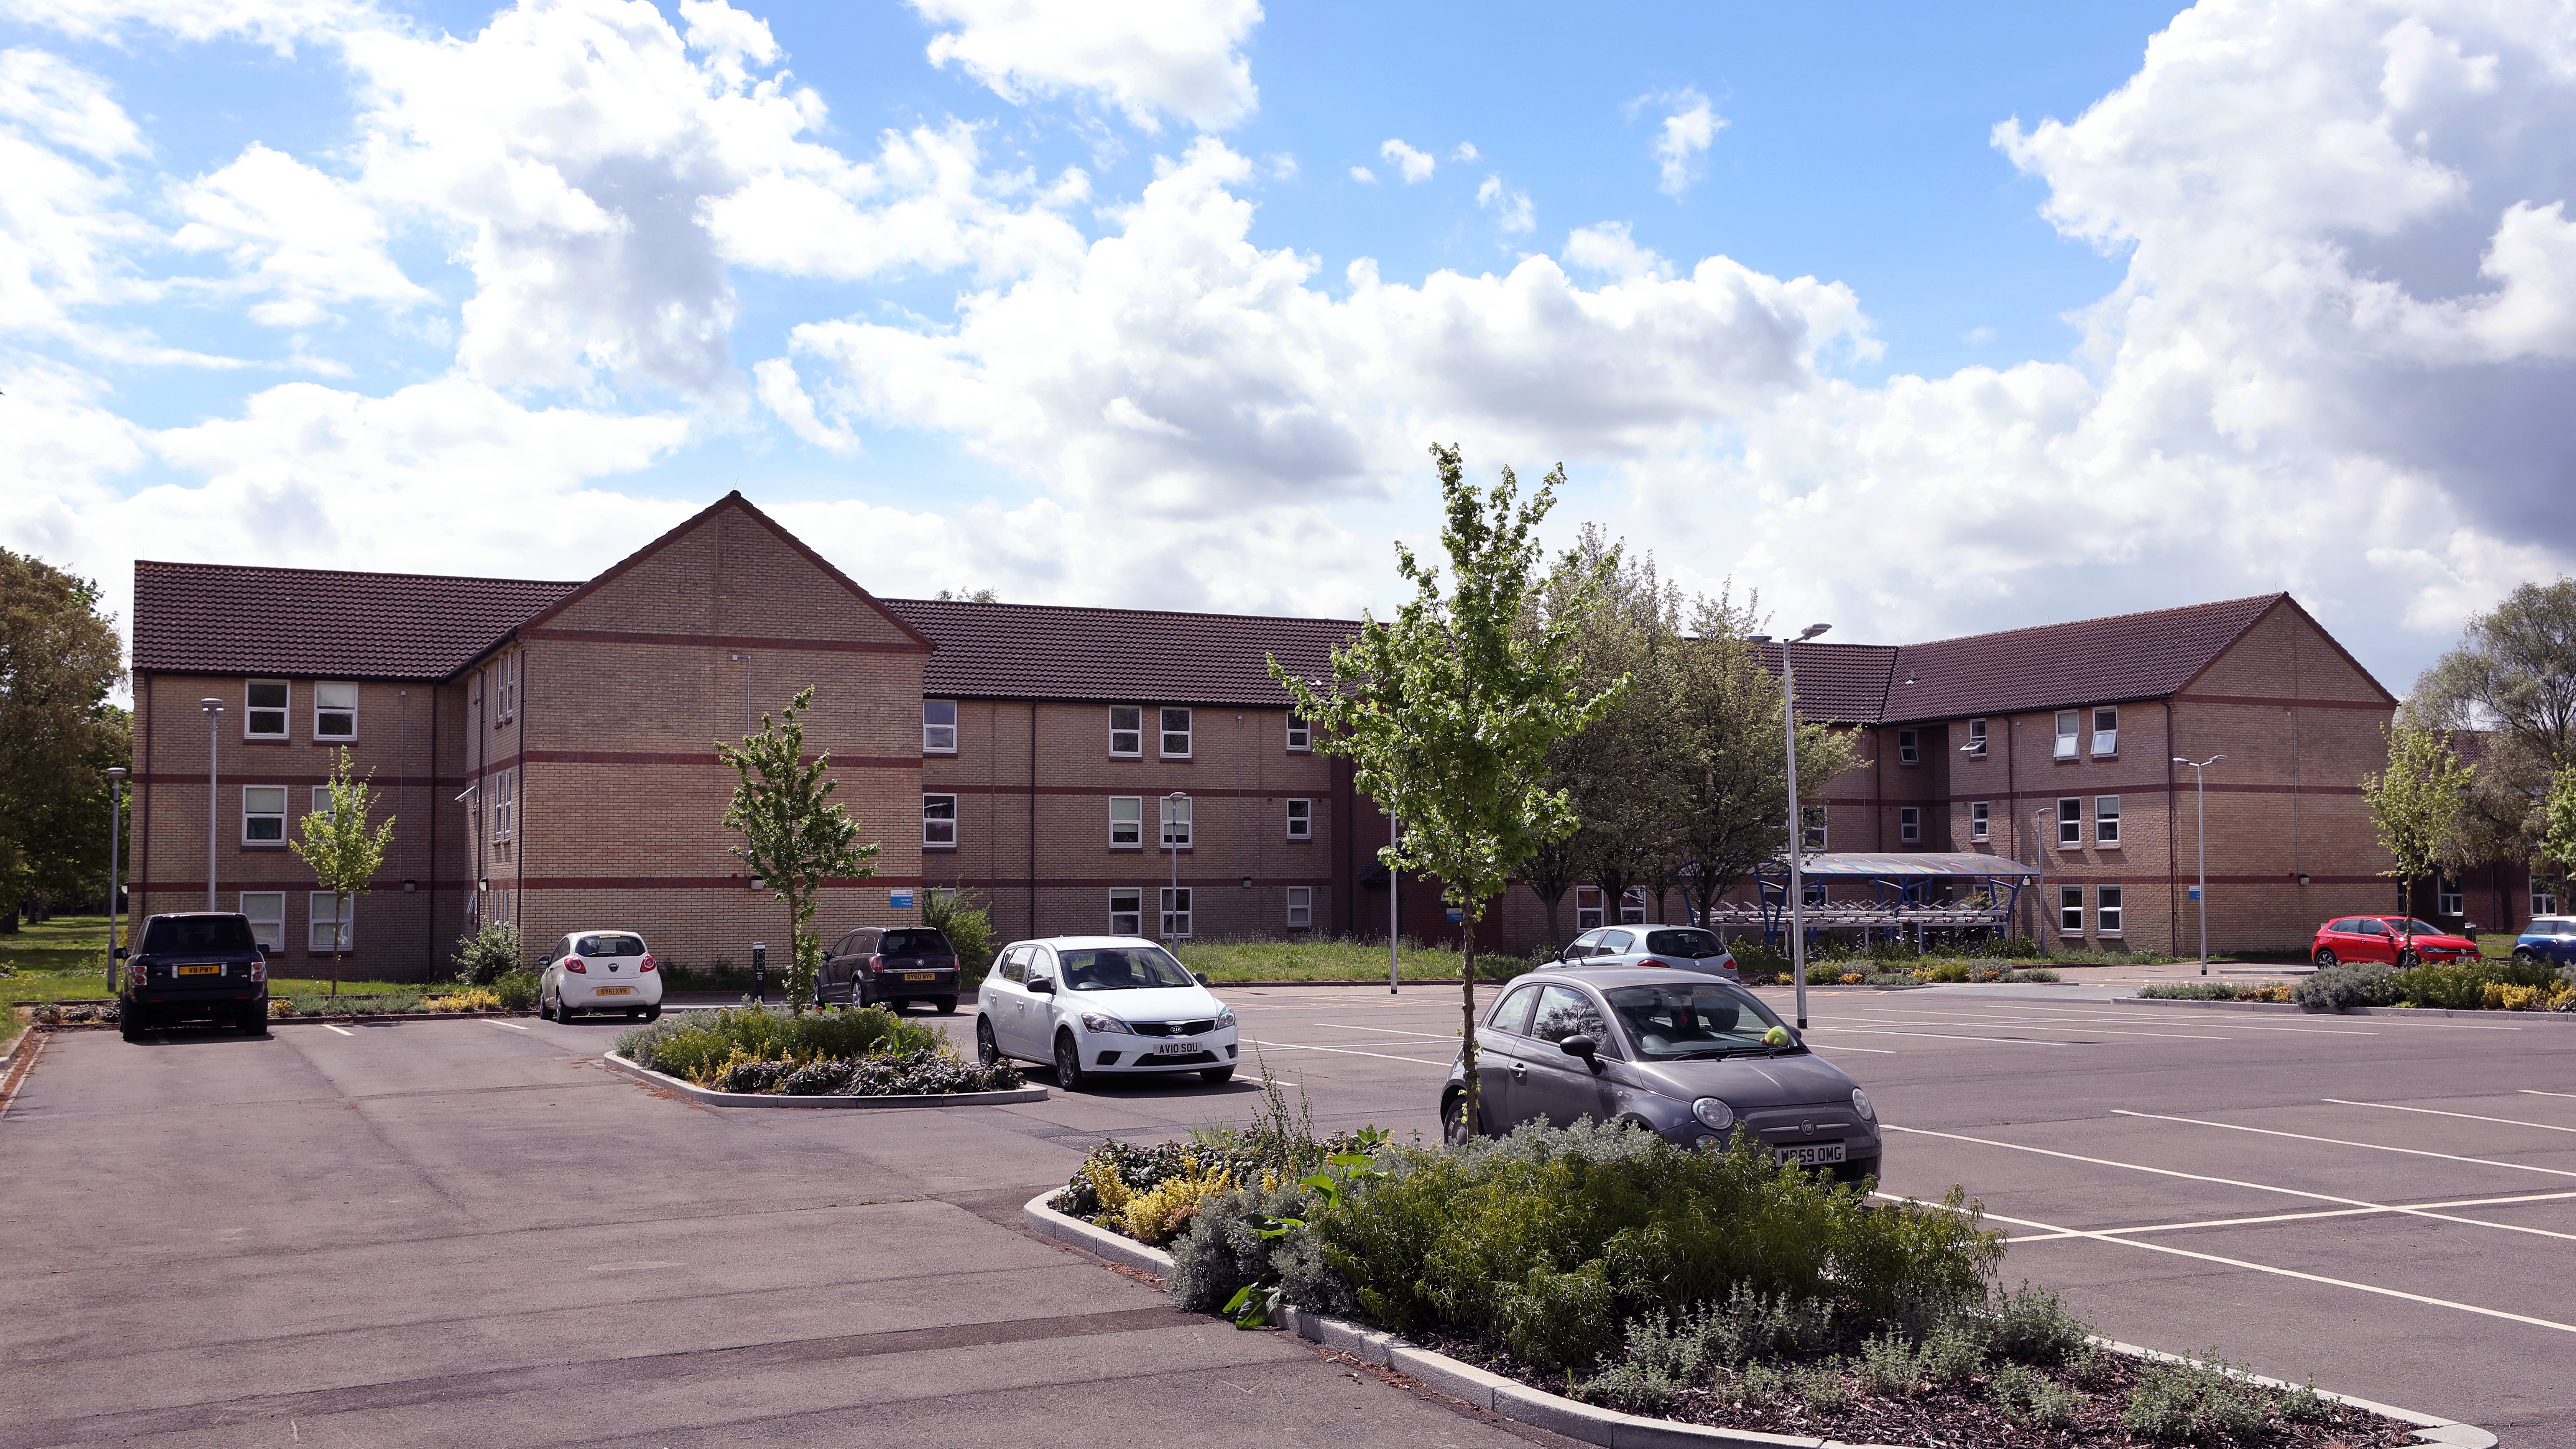 Investment sale of refurbished 235 bed NHS keyworker accommodation blocks located north of Cambridge